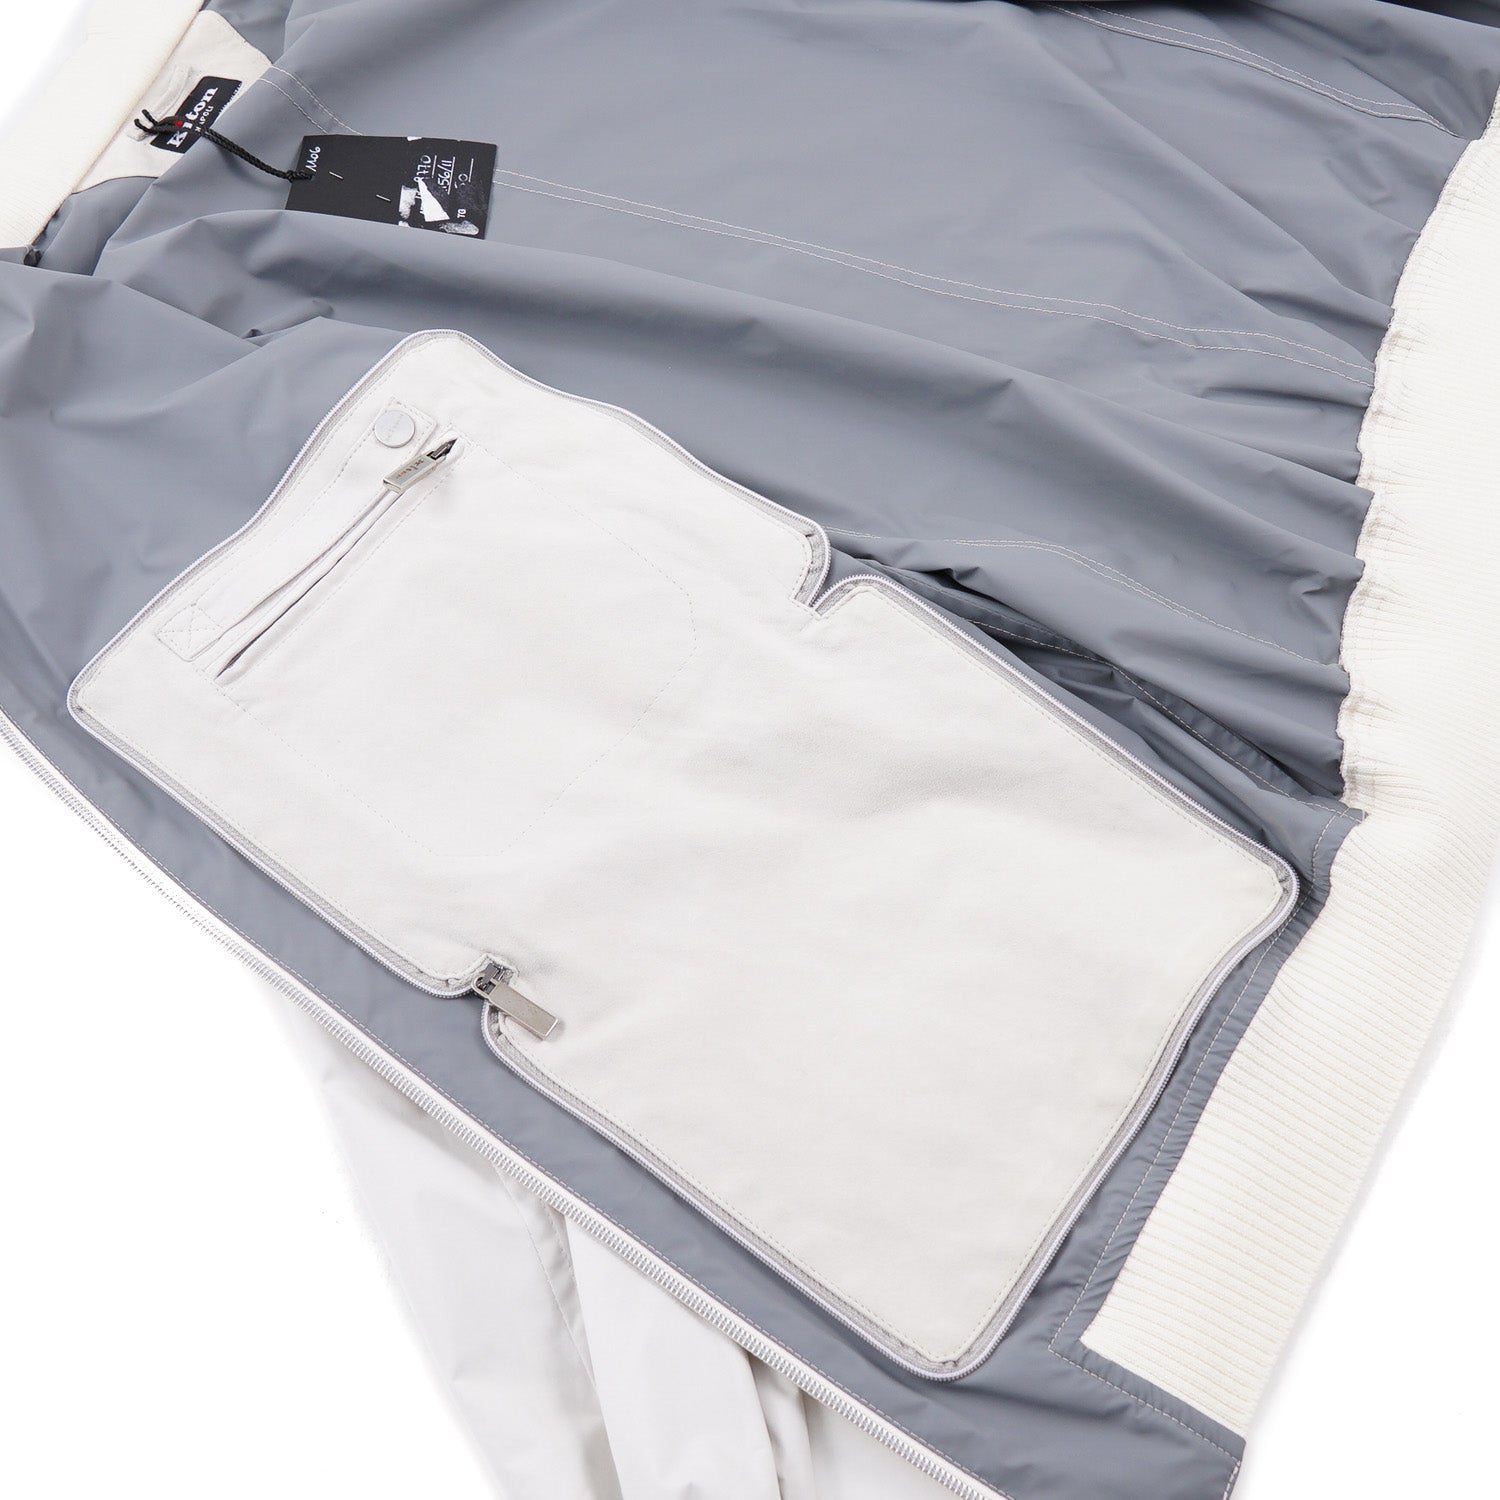 Kiton Packable Water-Repellent Bomber Jacket - Top Shelf Apparel